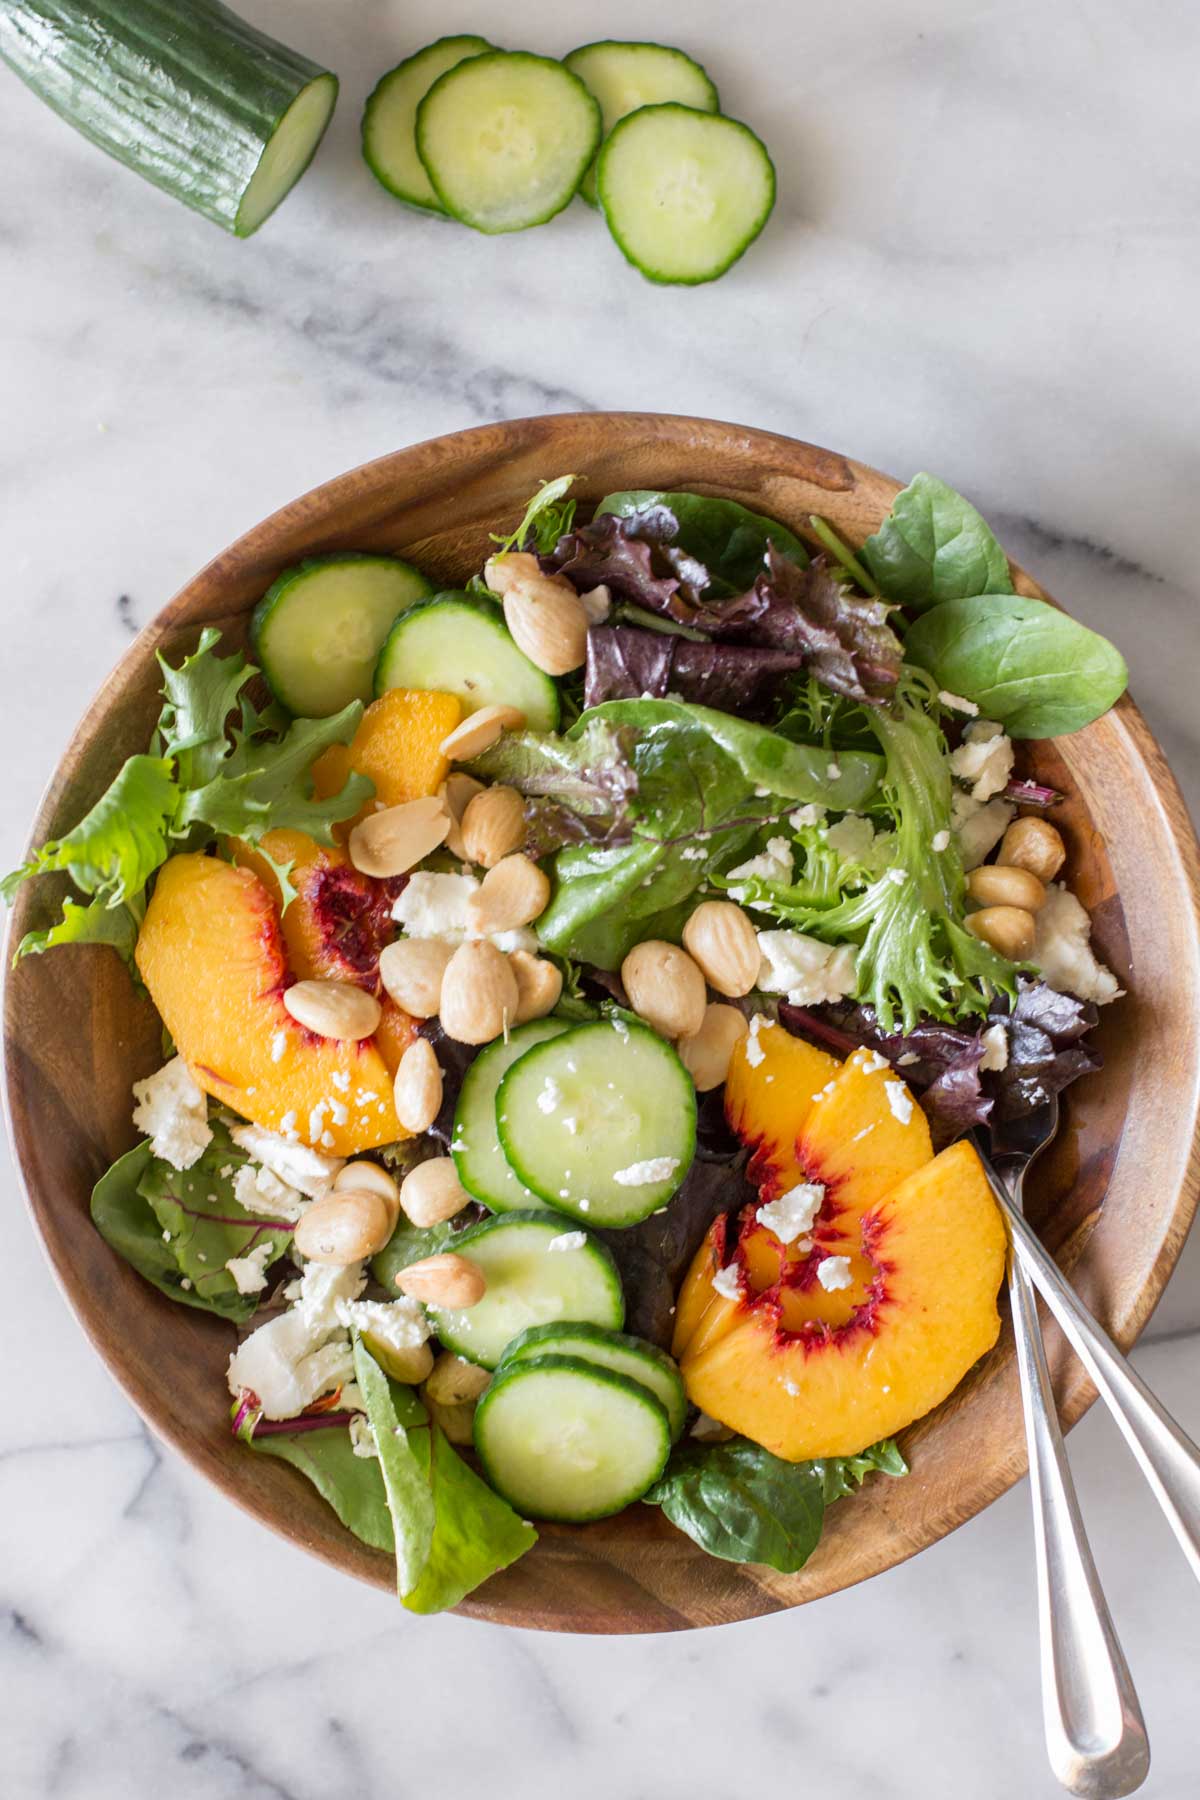 Image of Peach wood chips in a salad